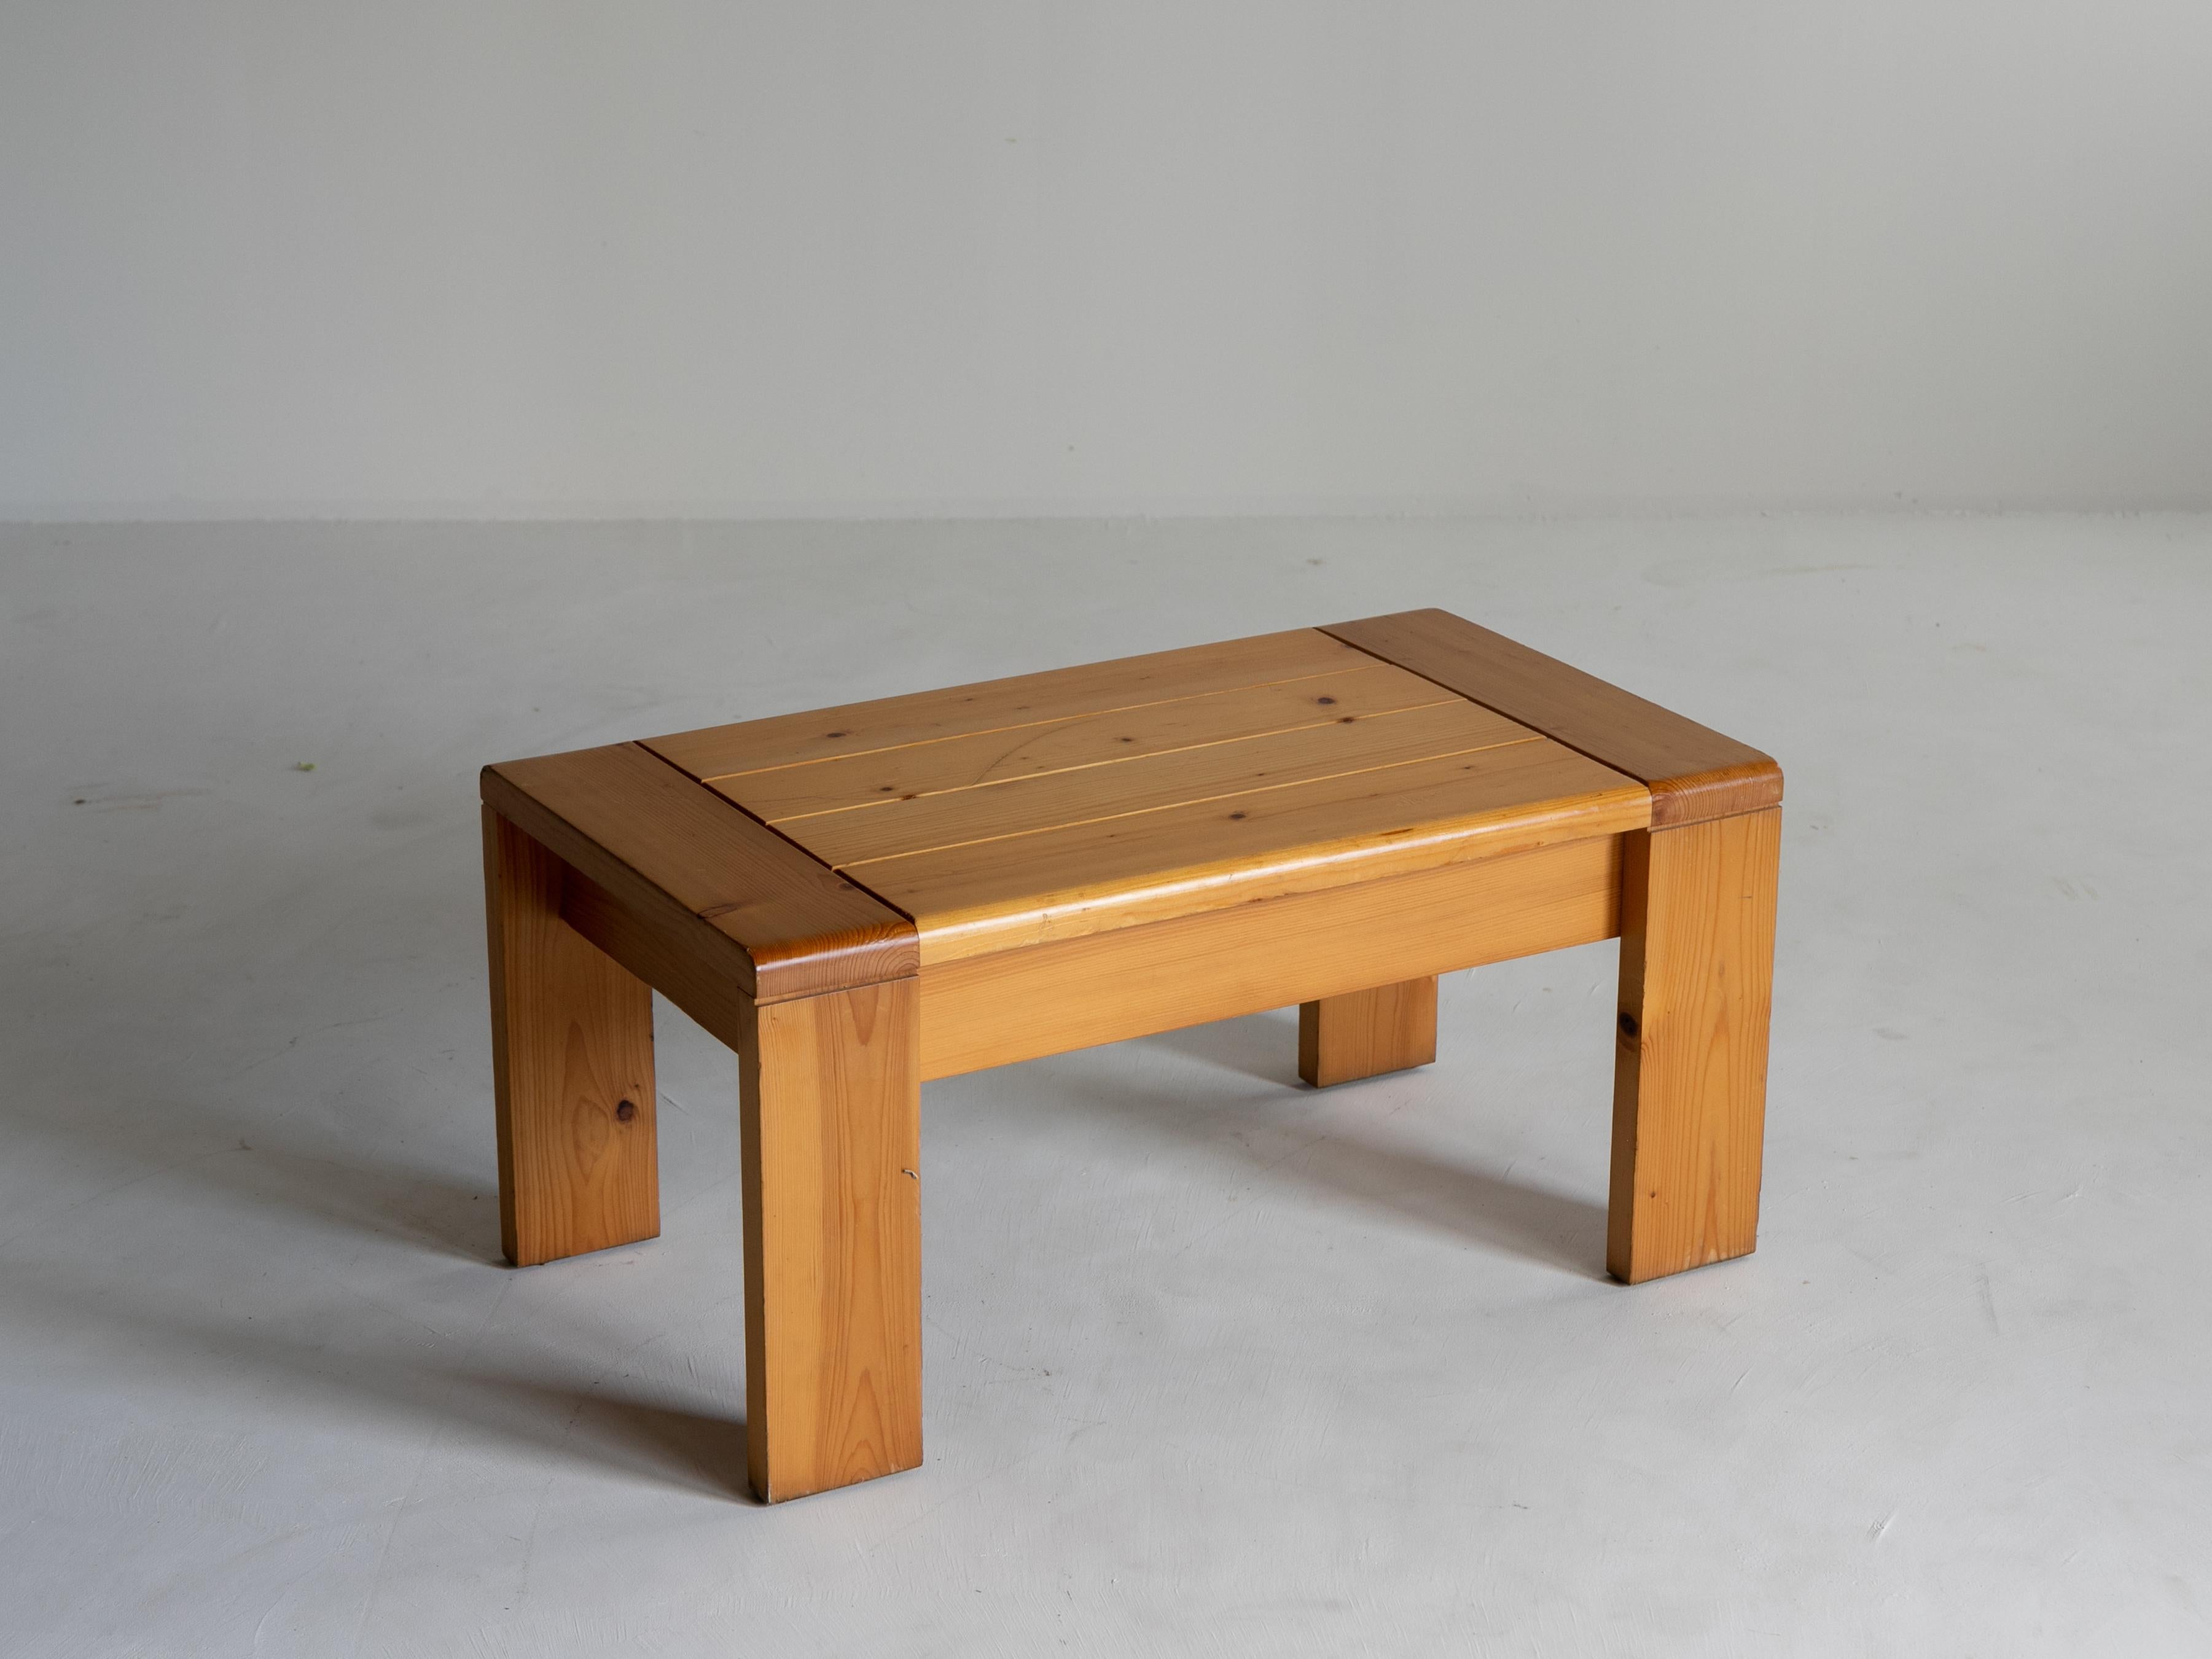 Low table used in Les Arcs 1600.
This piece was designed for Les Arcs 1600, one of Charlotte Perriand most important works.
The material is made of Swiss pine wood.
Can be used as a low table or bench.